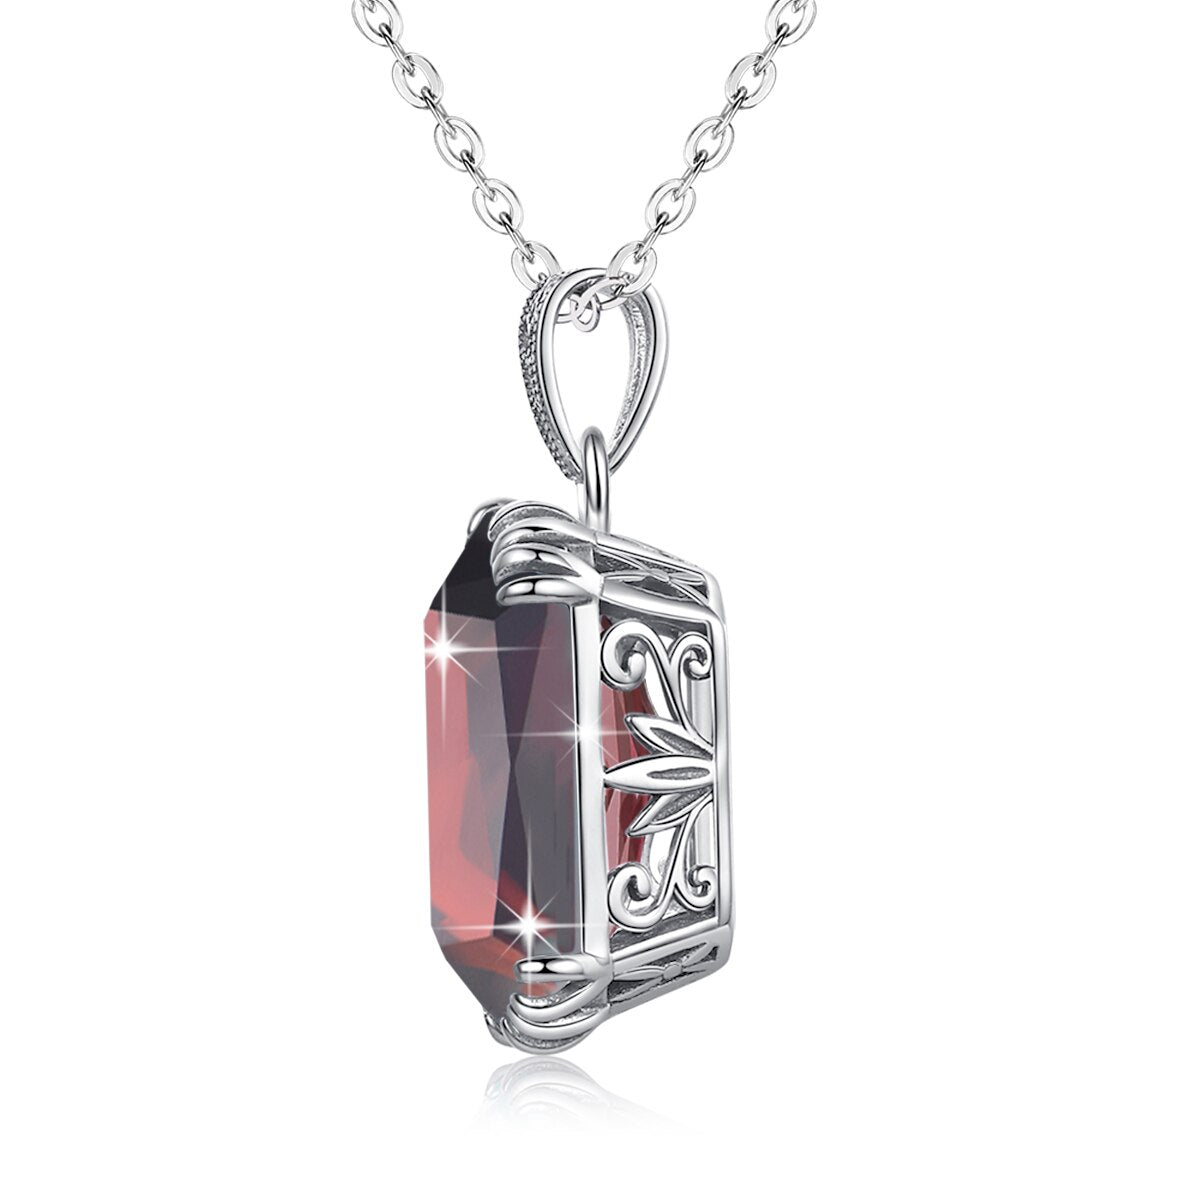 100% Real 925 Sterling Silver Fine Jewelry Necklace Square Garnet Classic Slide Pendants For Women Accessories Silver 925 Gifts